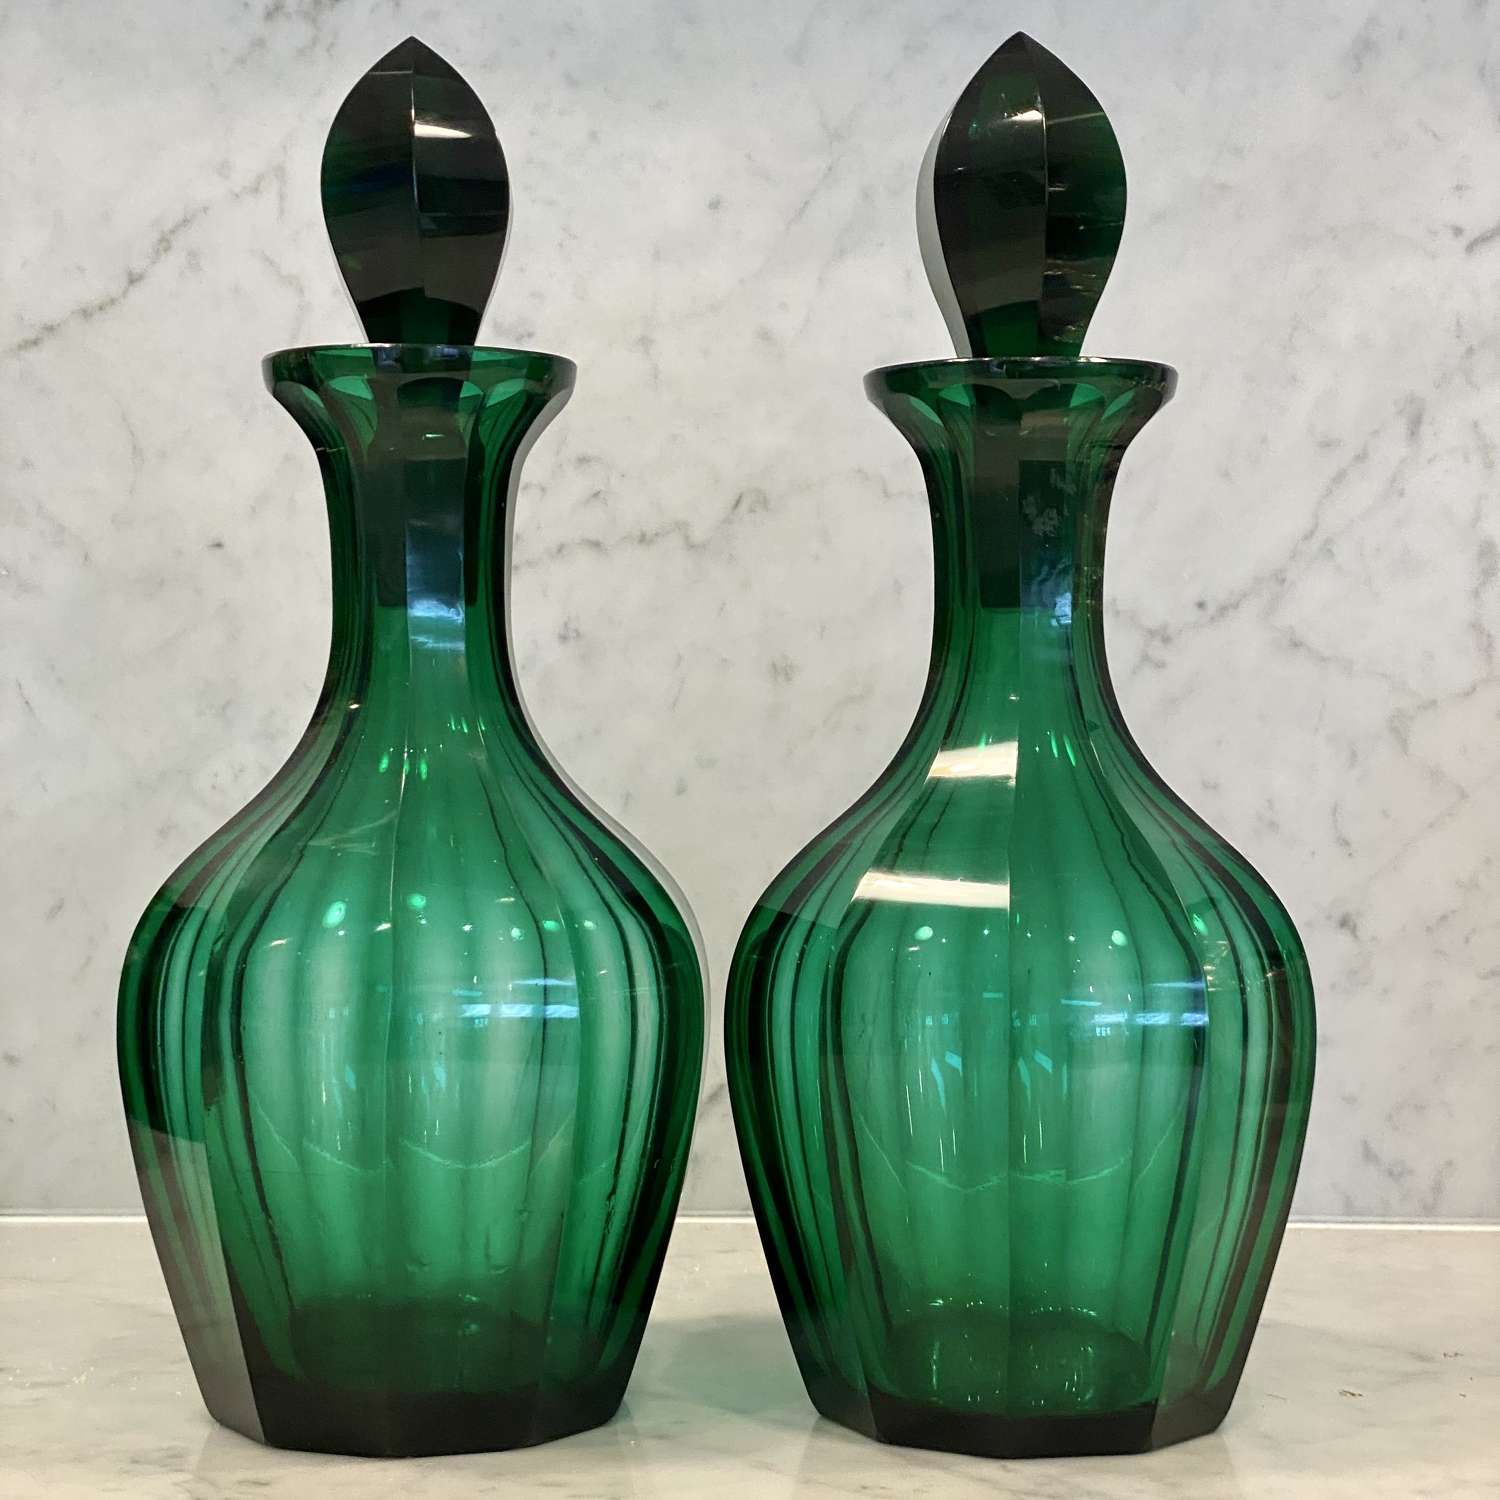 Pair of Victorian green glass Magnum decanters